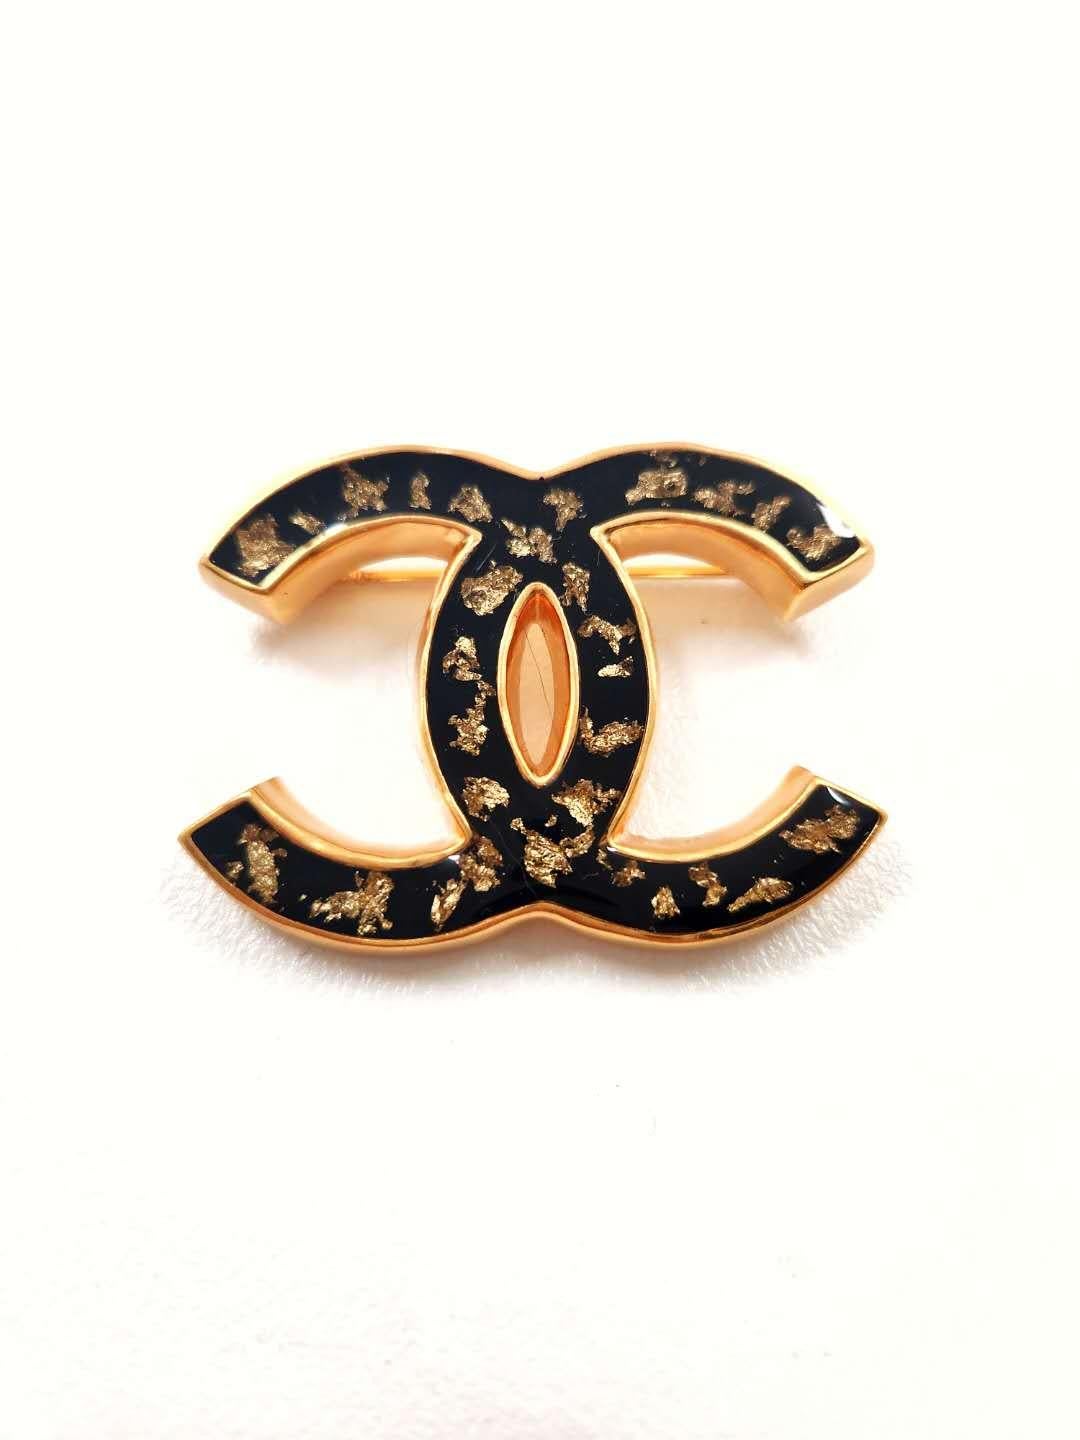 Introducing the Chanel 23 Gold Black Resin with Gold Foil CC Large Brooch, a stunning accessory that captures the essence of Chanel's timeless elegance and impeccable craftsmanship. This brooch is a true statement piece that exudes sophistication